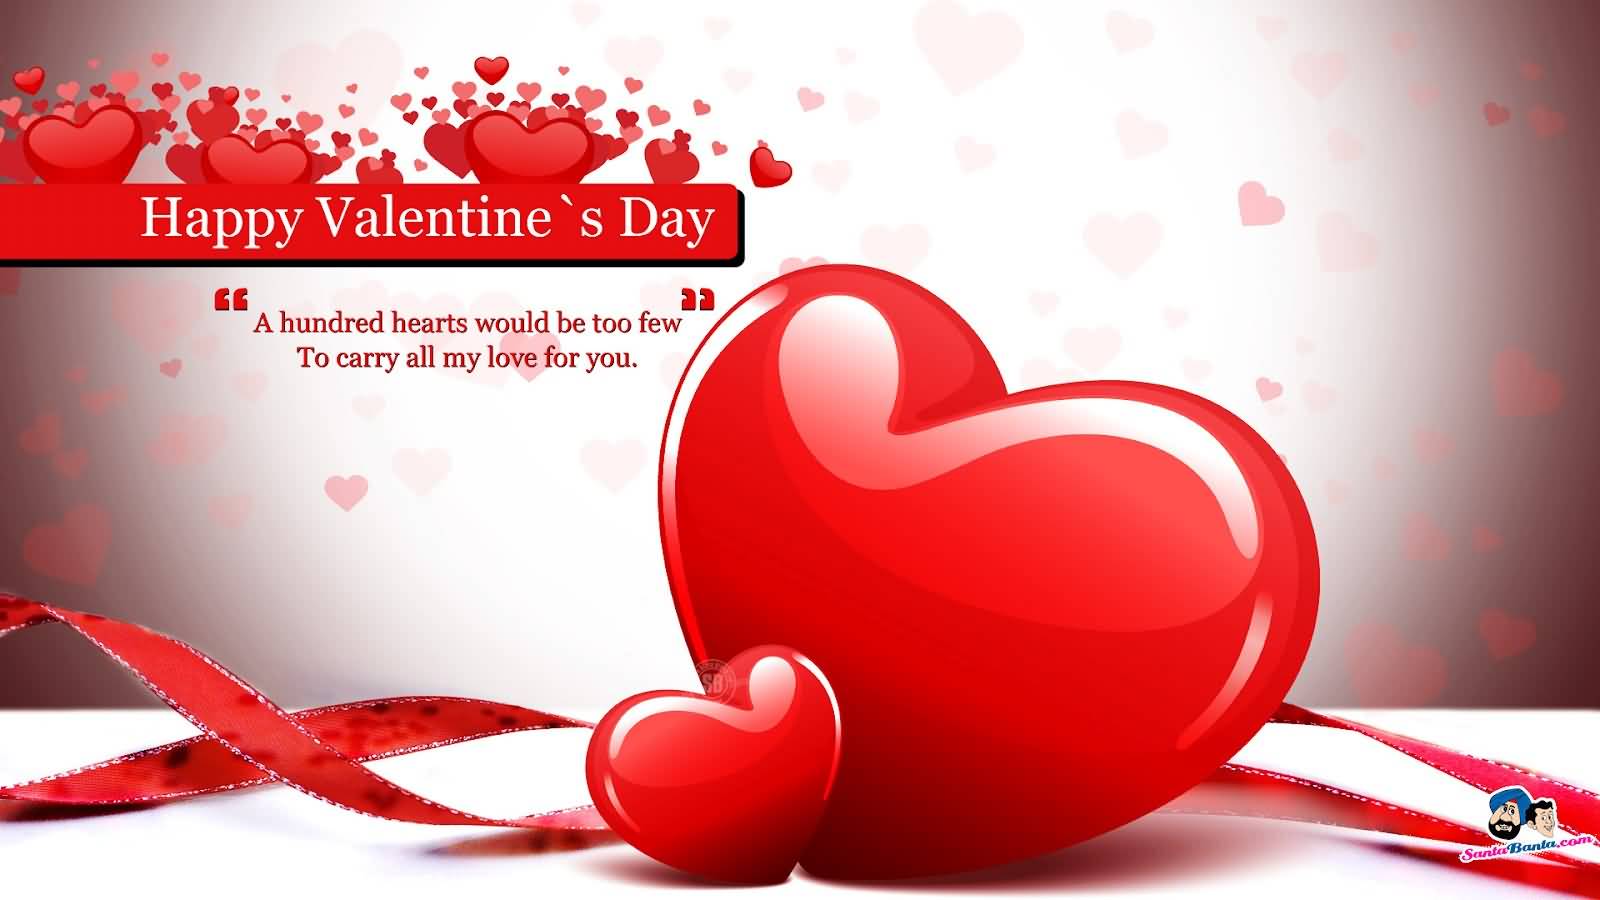 Happy Valentine’s Day A Hundred Hearts Would Be Too Few To Carry All My Love For You Card